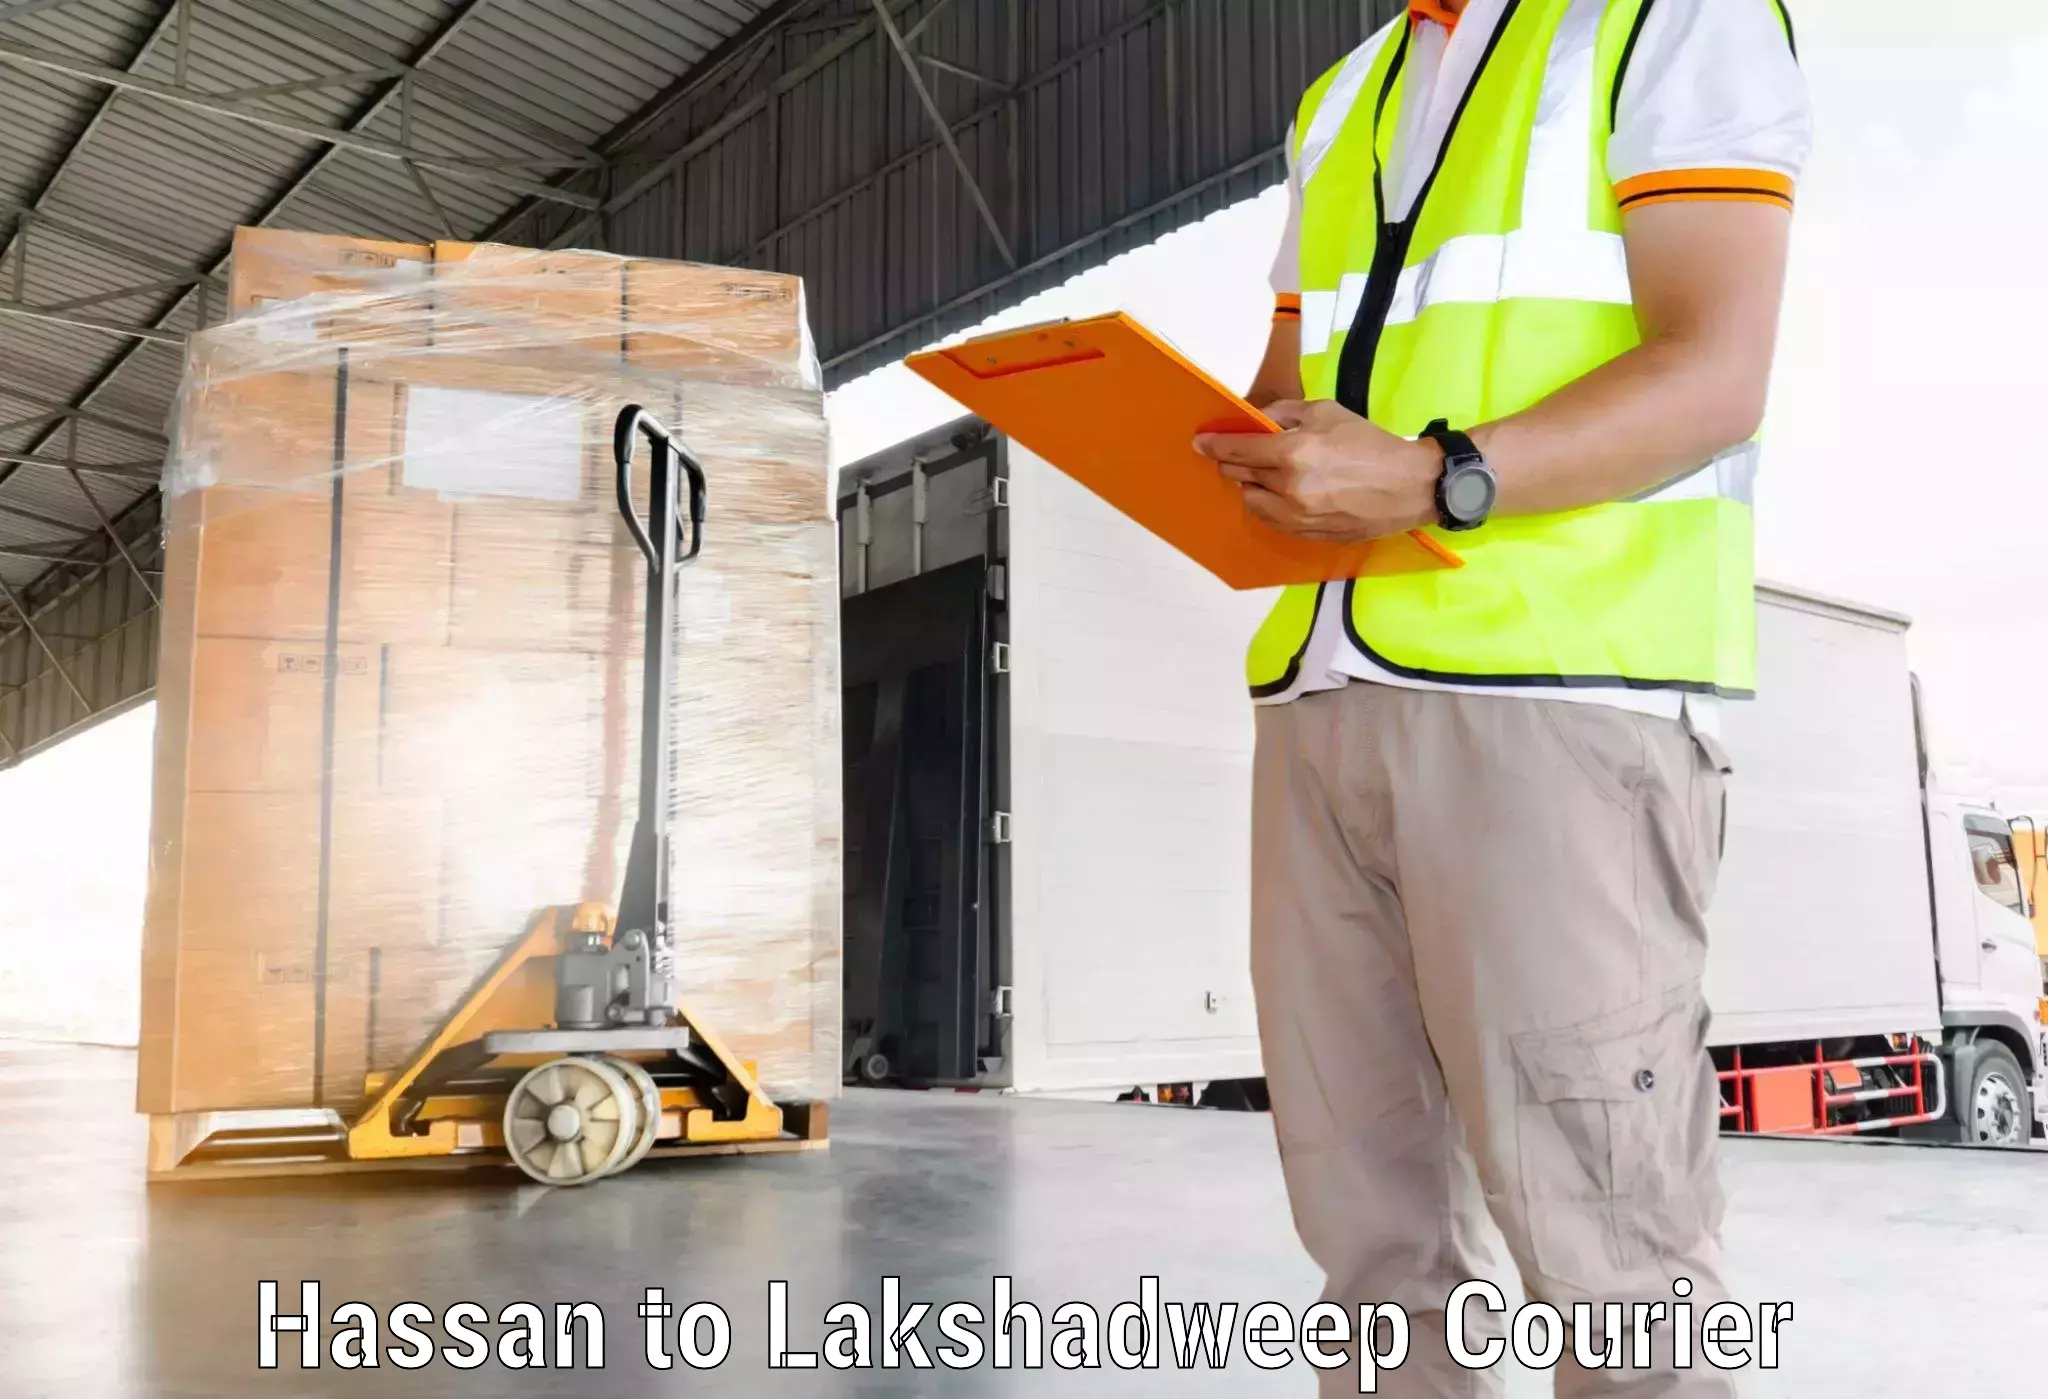 Business delivery service Hassan to Lakshadweep